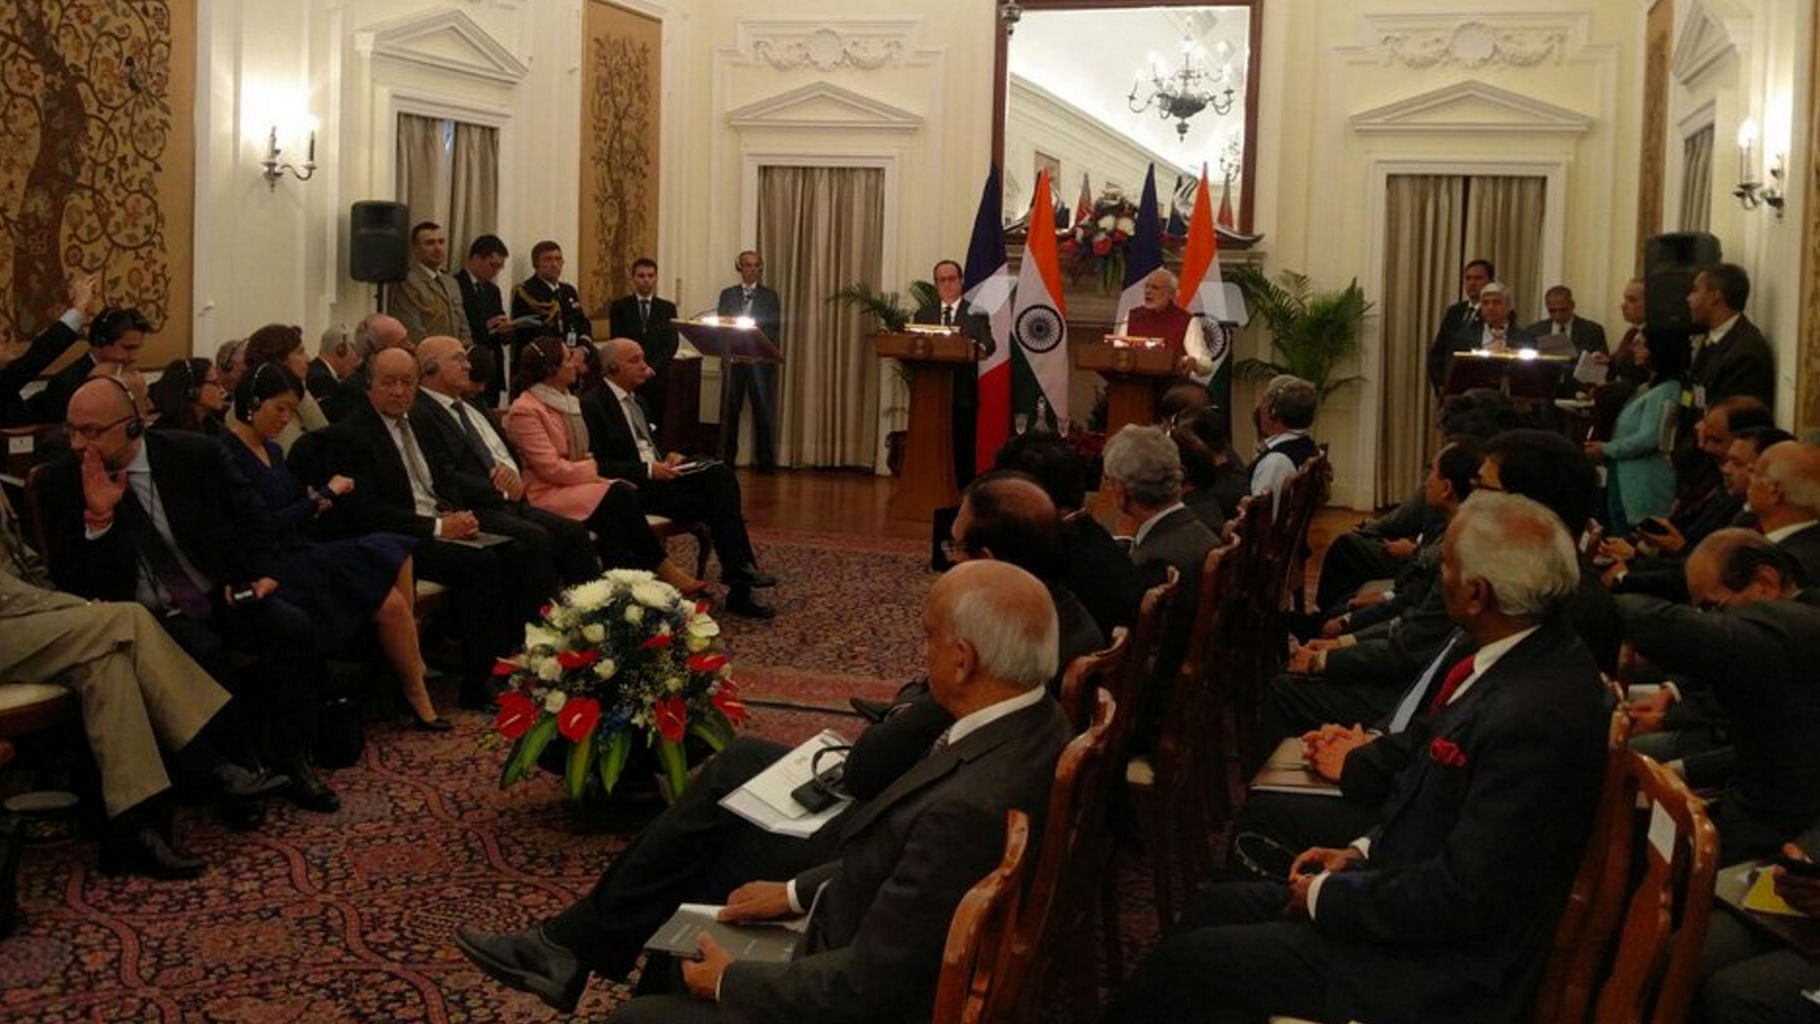 PM Modi and President Hollande deliver a joint statement. (Photo Courtesy: <a href="https://twitter.com/MEAIndia/status/691548084698939396">Twitter.com/@MEAIndia</a>)